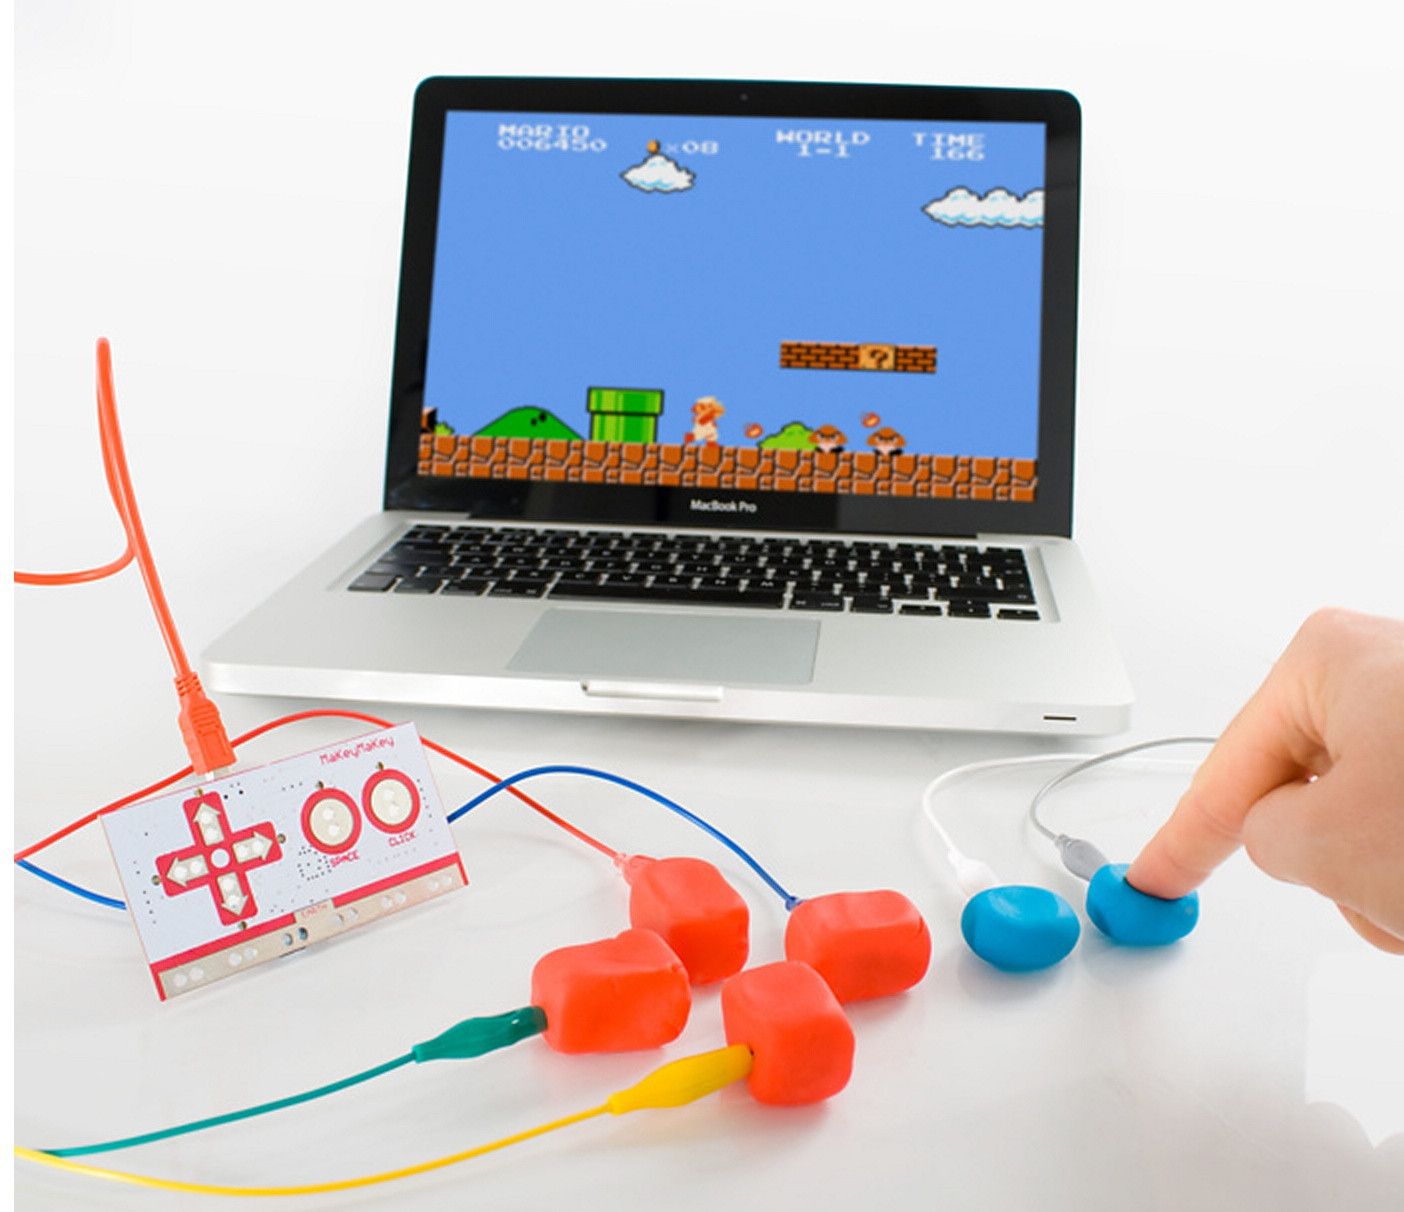 cool product makey makey - 888490 308 Worl" Time MacBook to